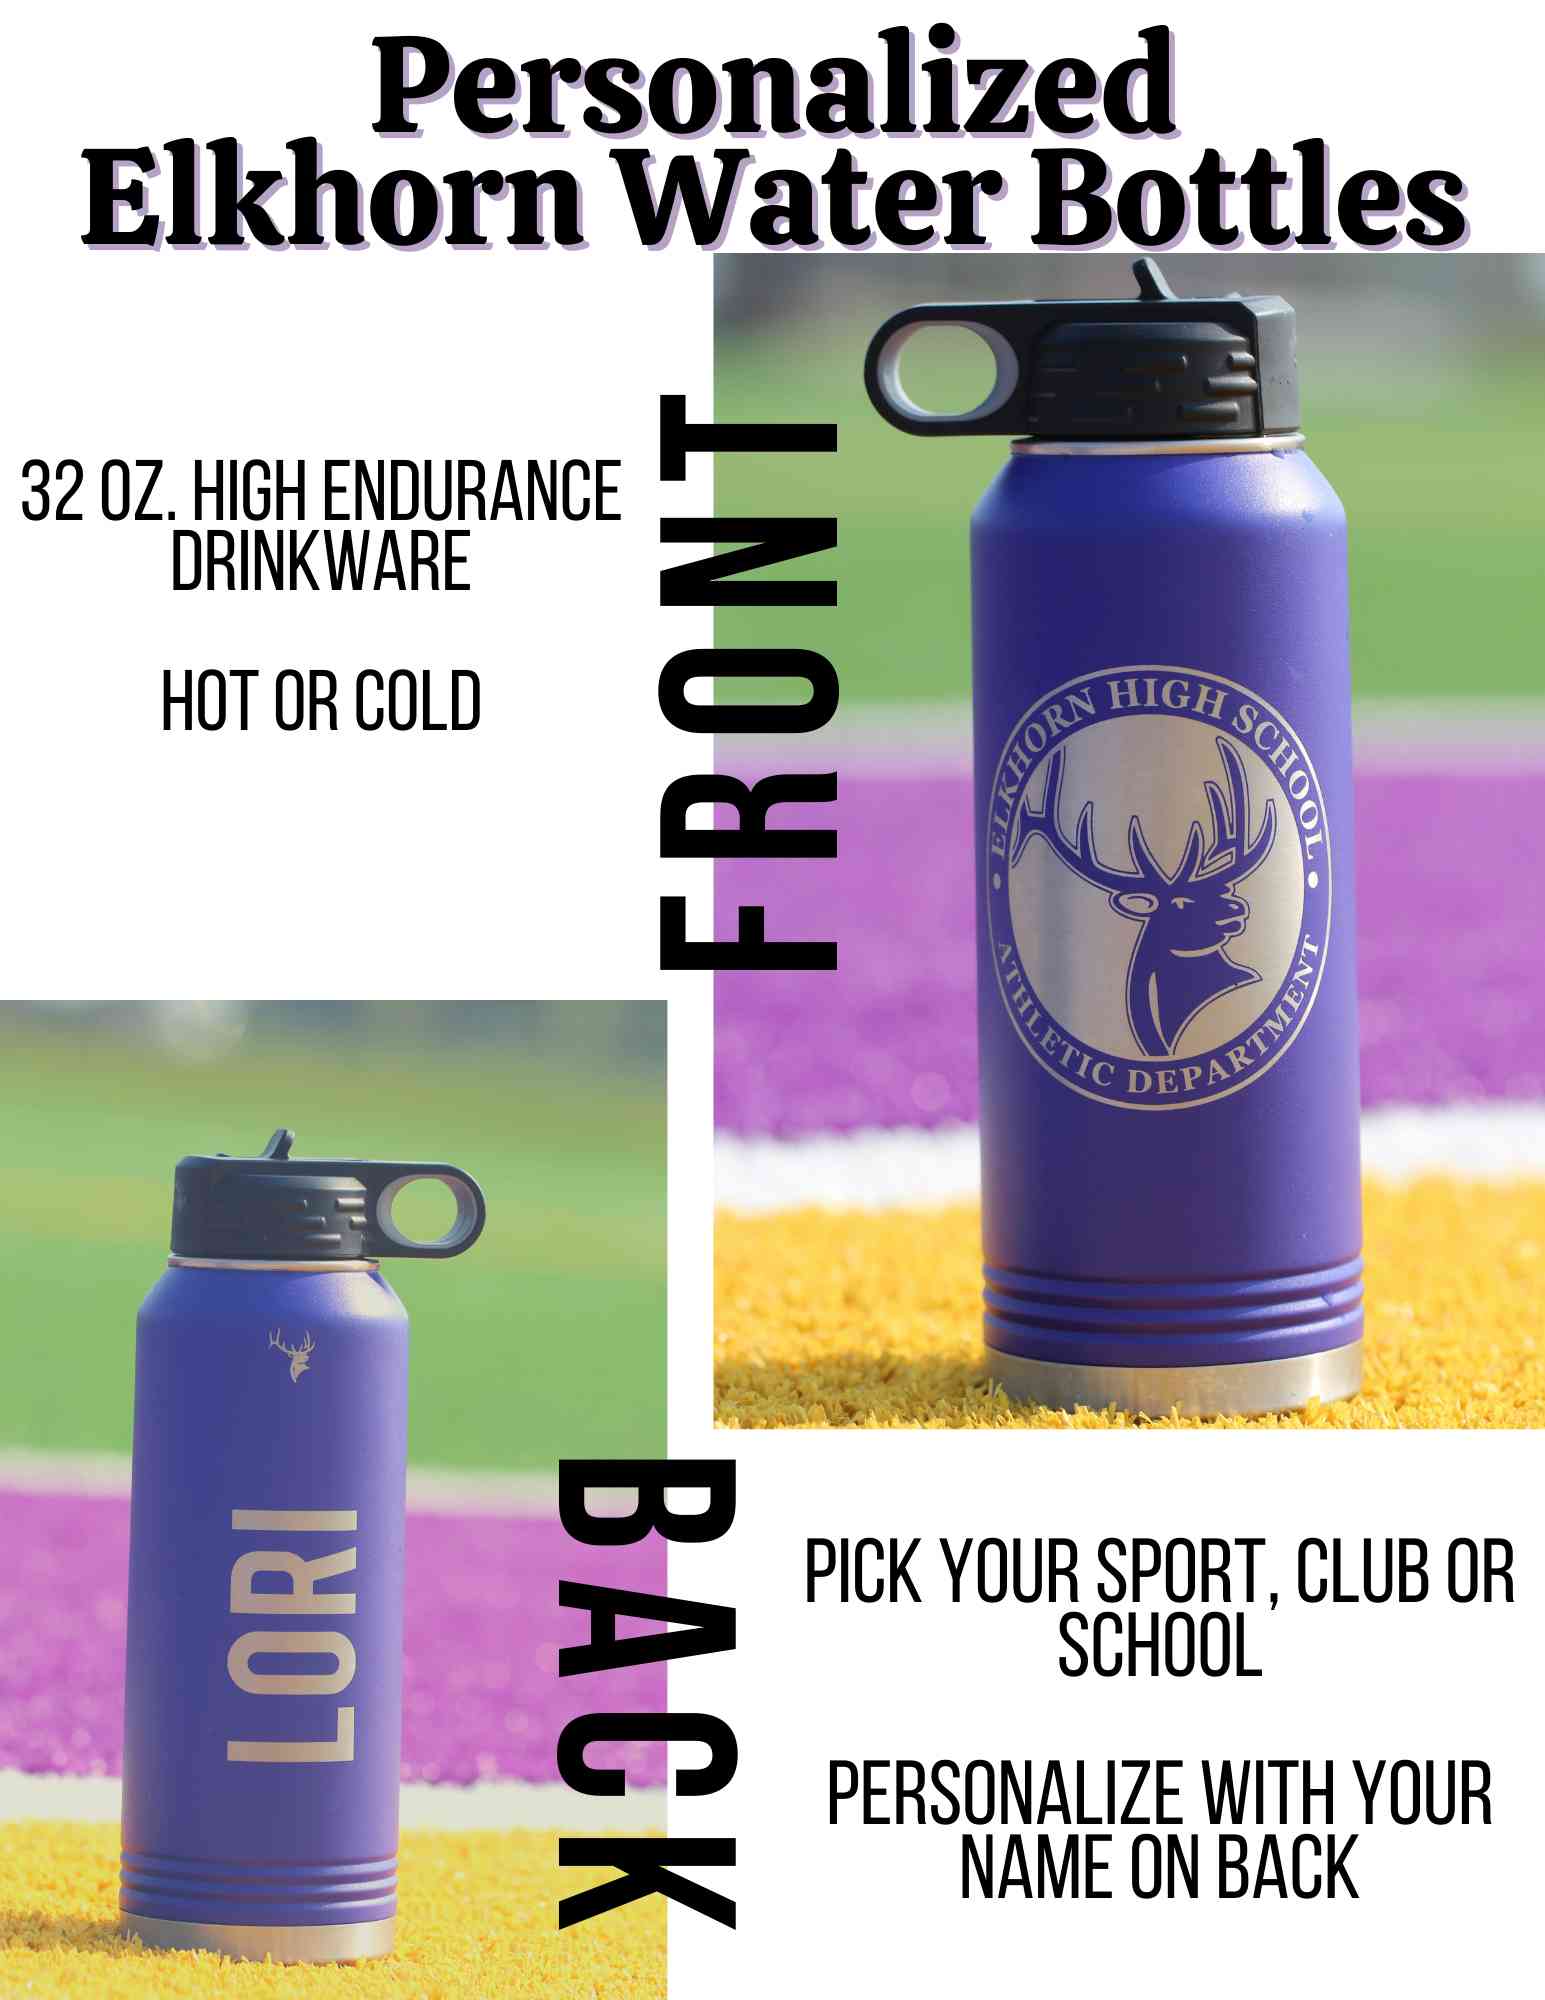 Elkhorn High School Athletics and Activity Waterbottles Image